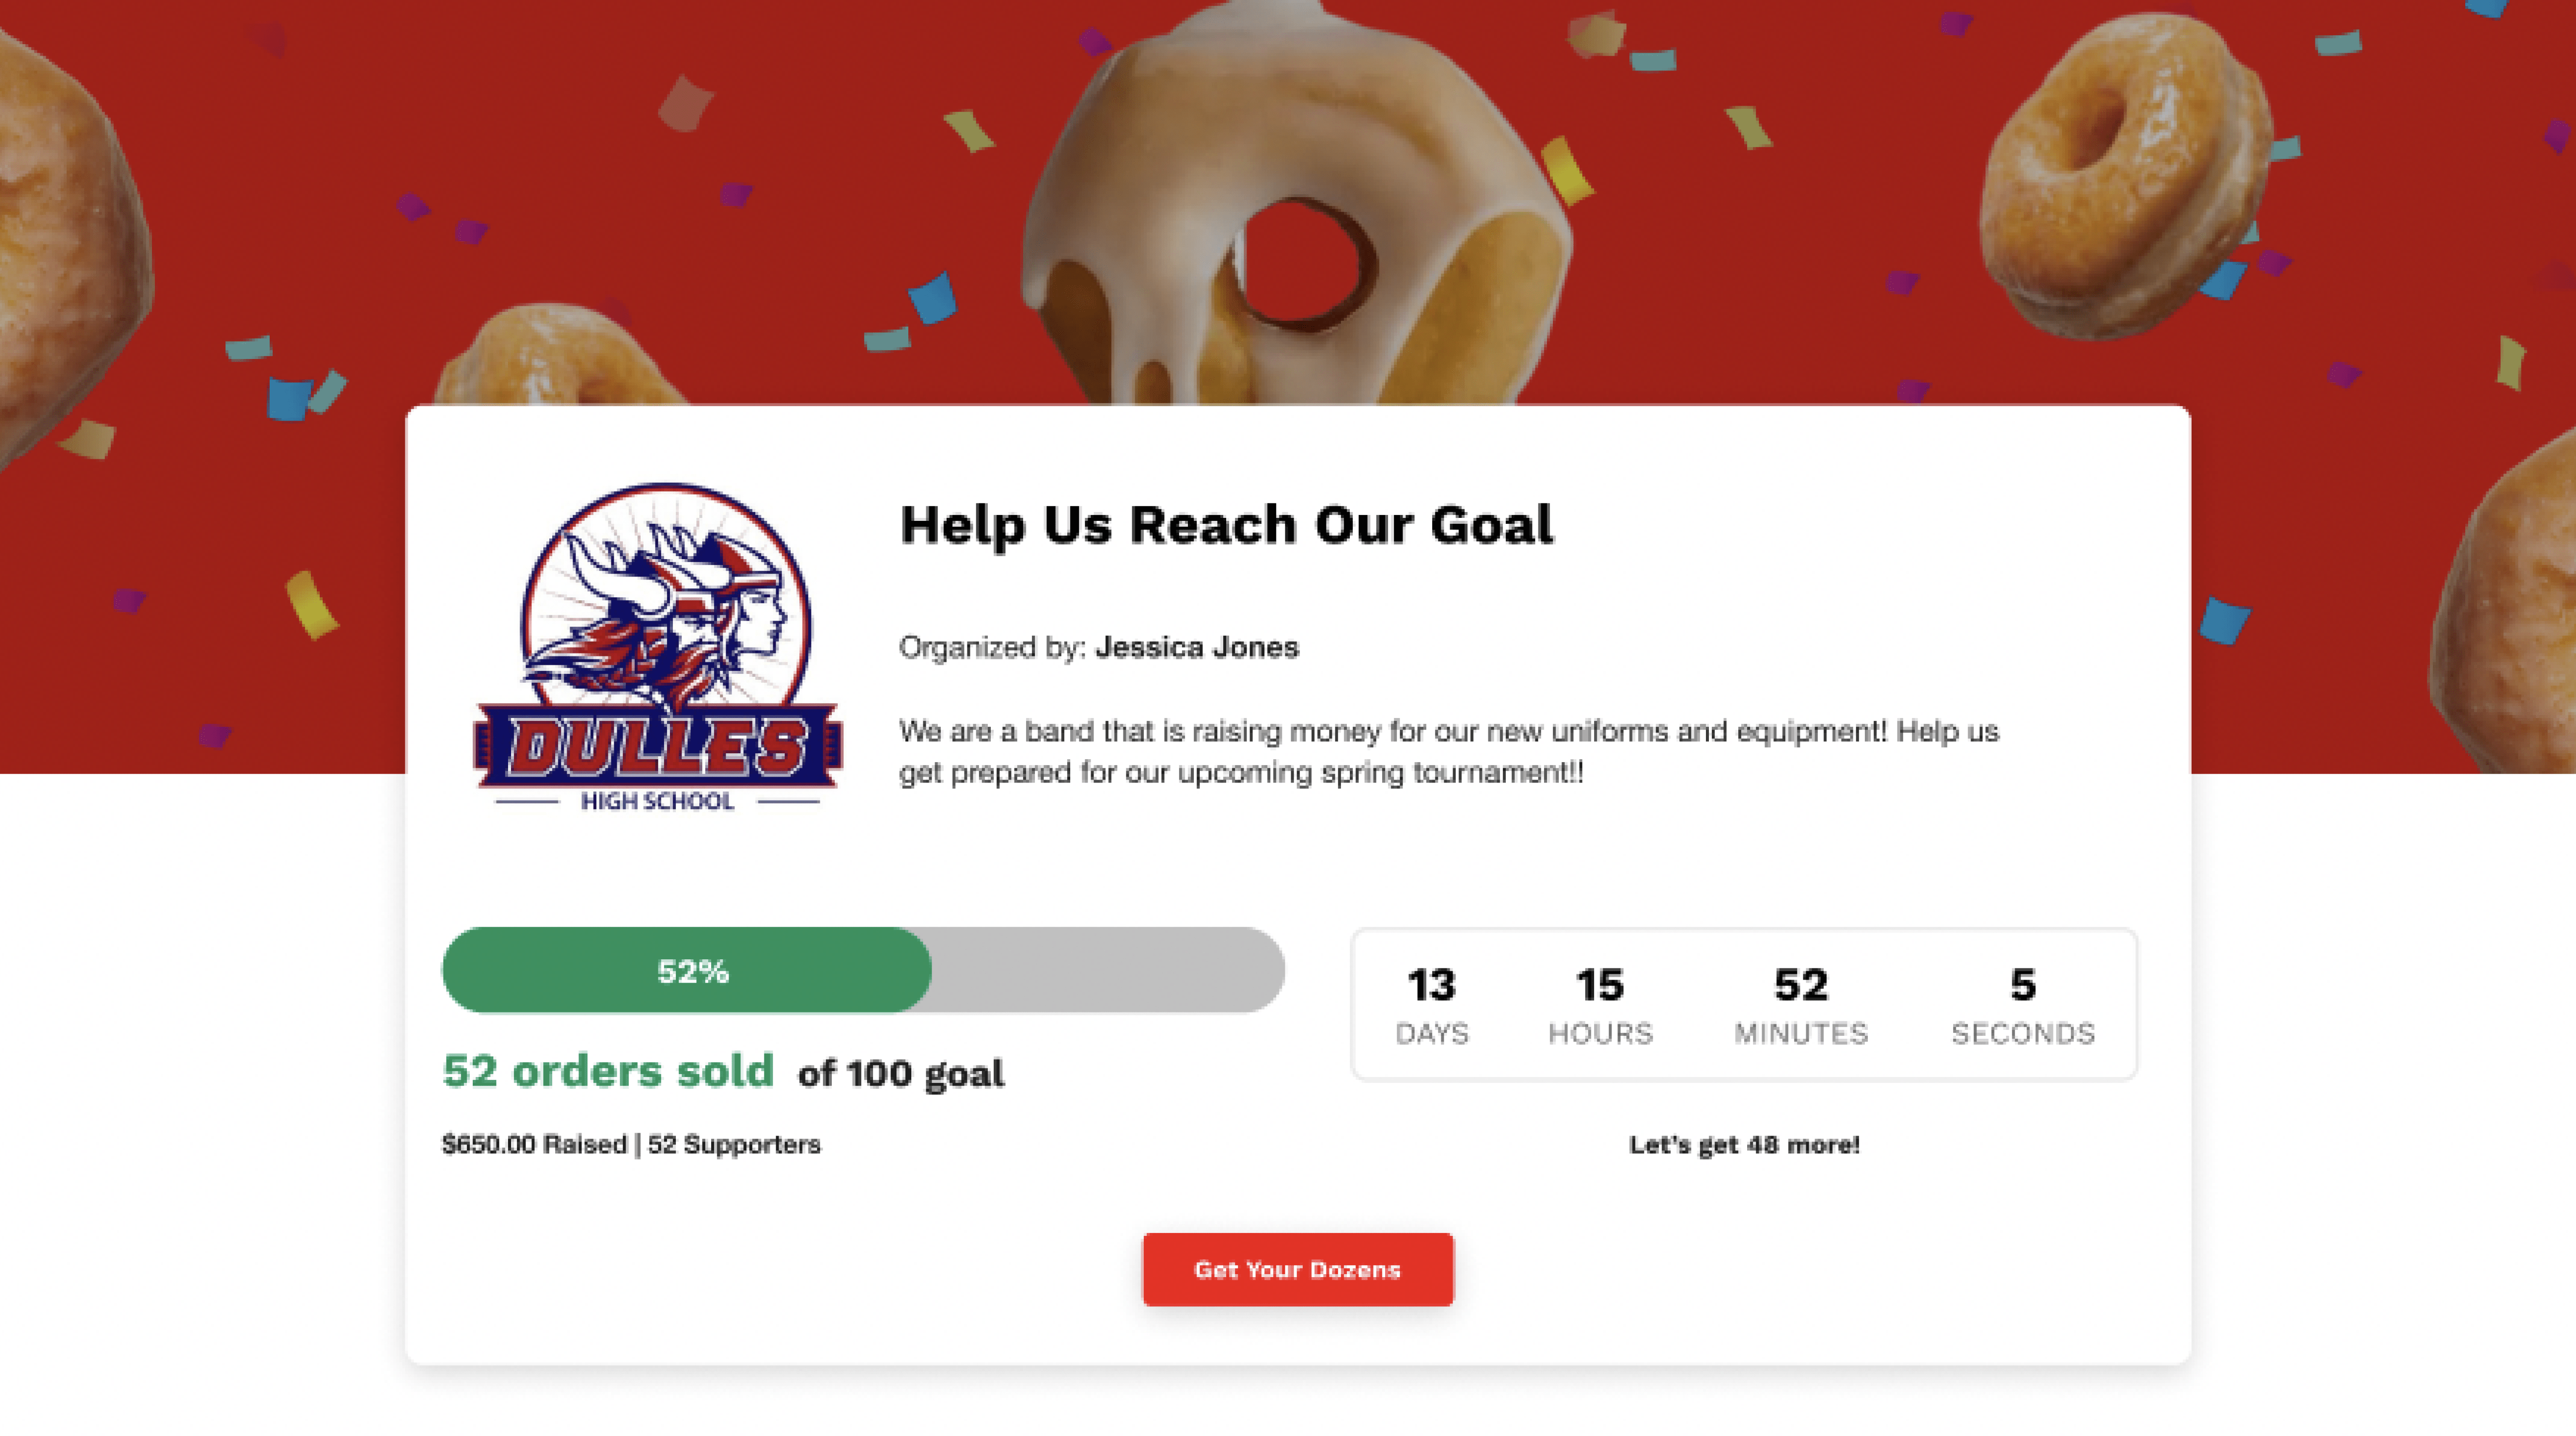 Maximizing Fundraising Efforts with a Shipley Do-Nuts Fundraising Campaign - GroupRaise